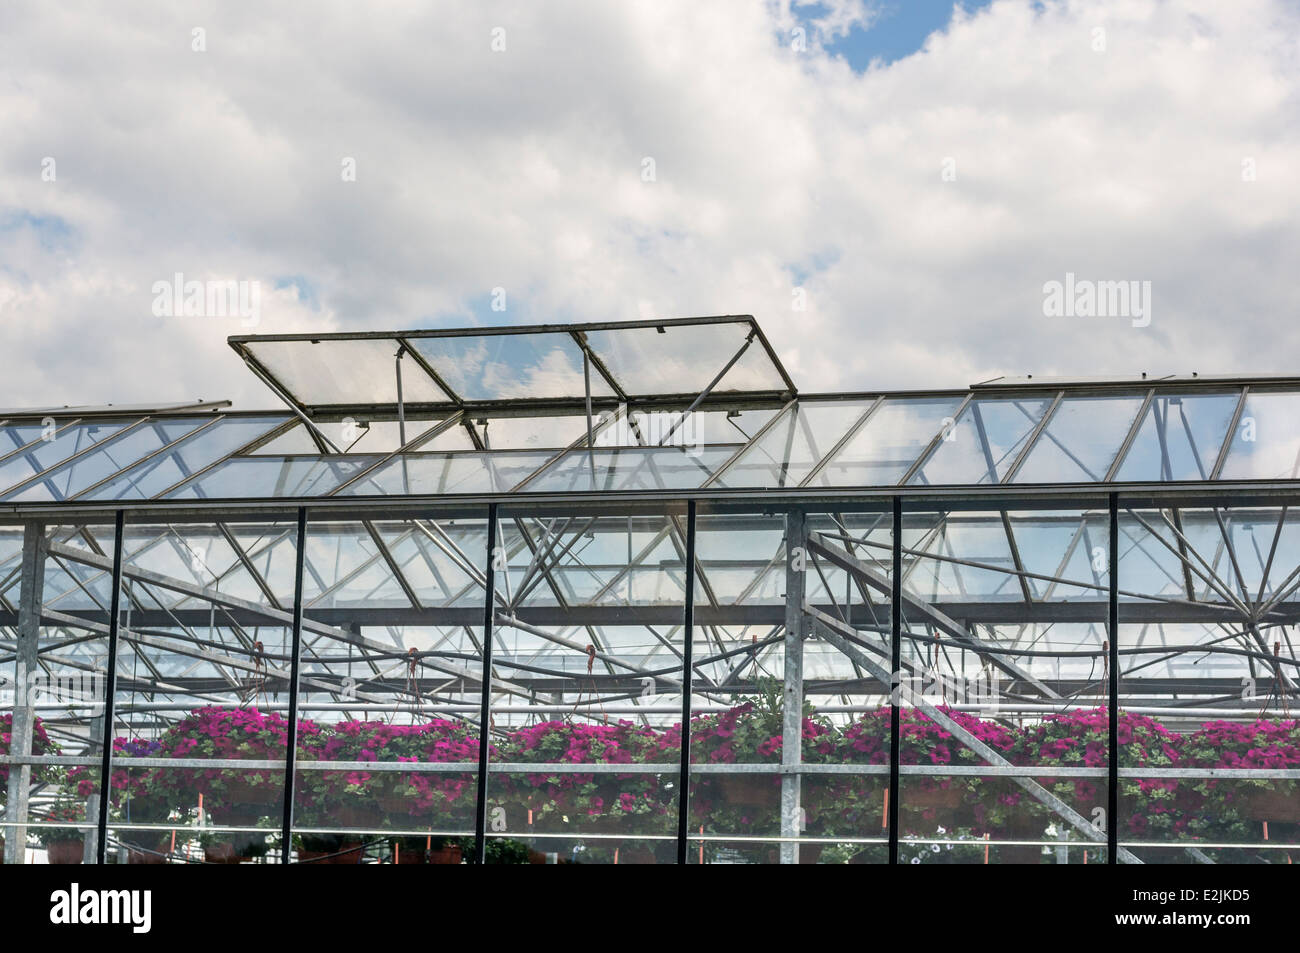 Greenhouse at a garden centre showing open ventilation panels Stock Photo